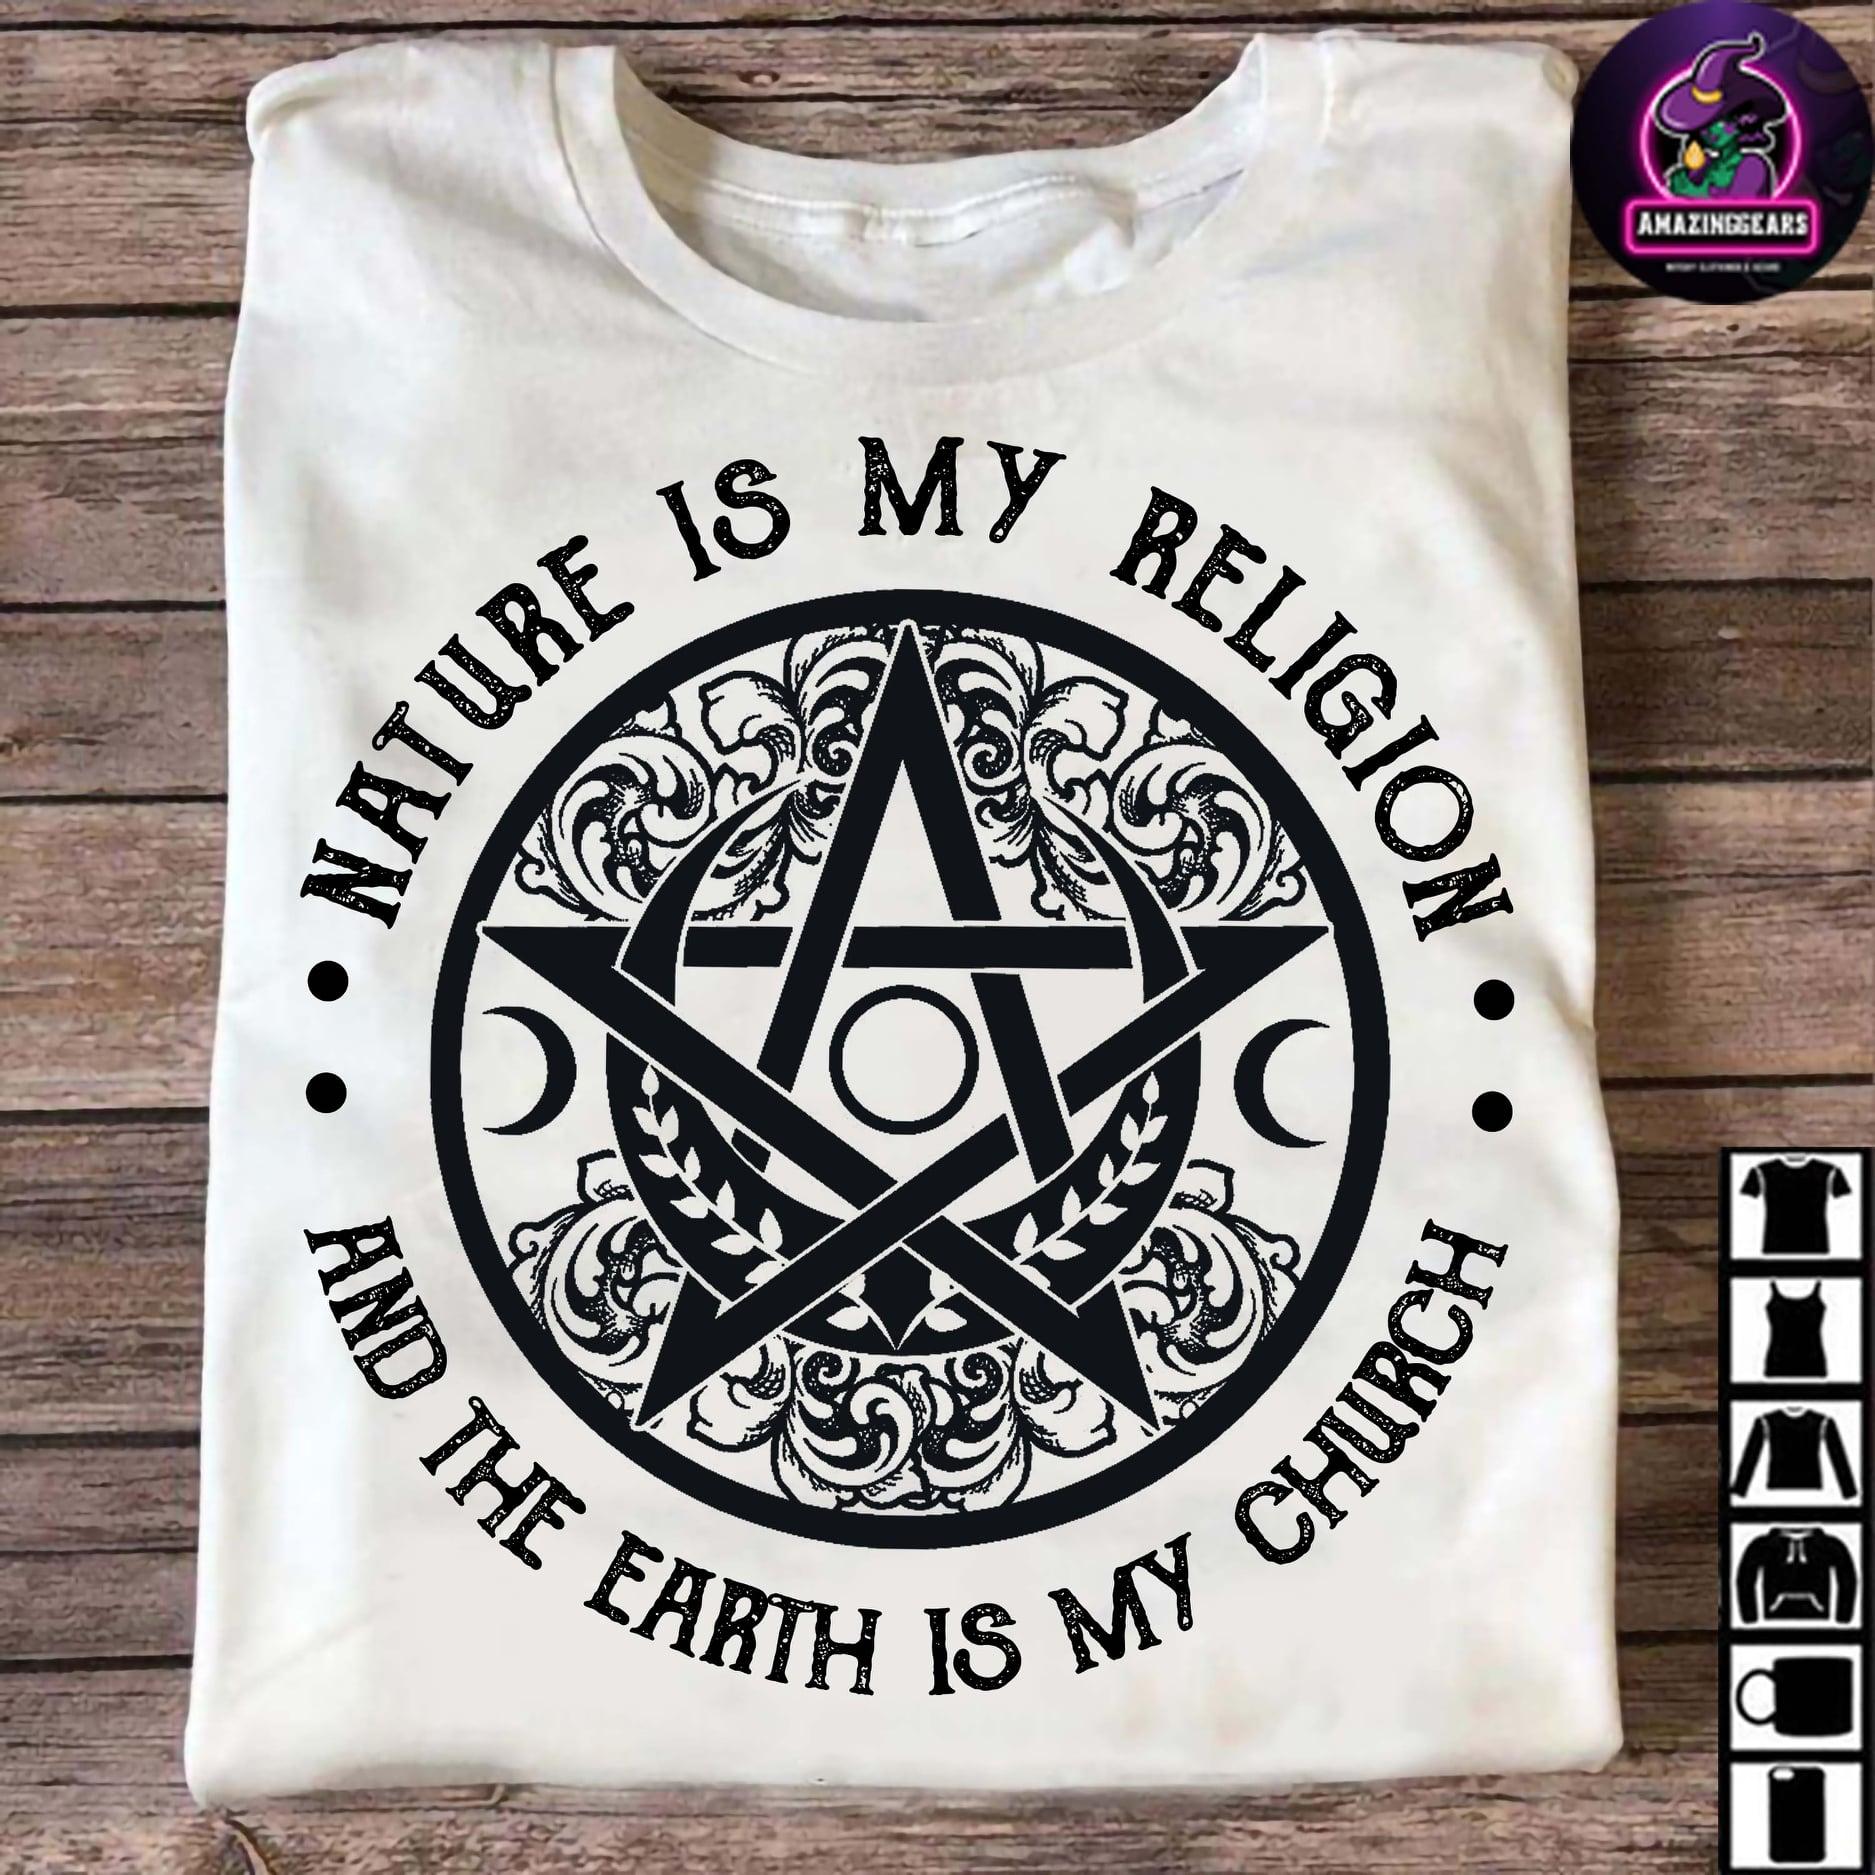 Nature is my religion and the earth is my church - Nature worship, nature lover gift